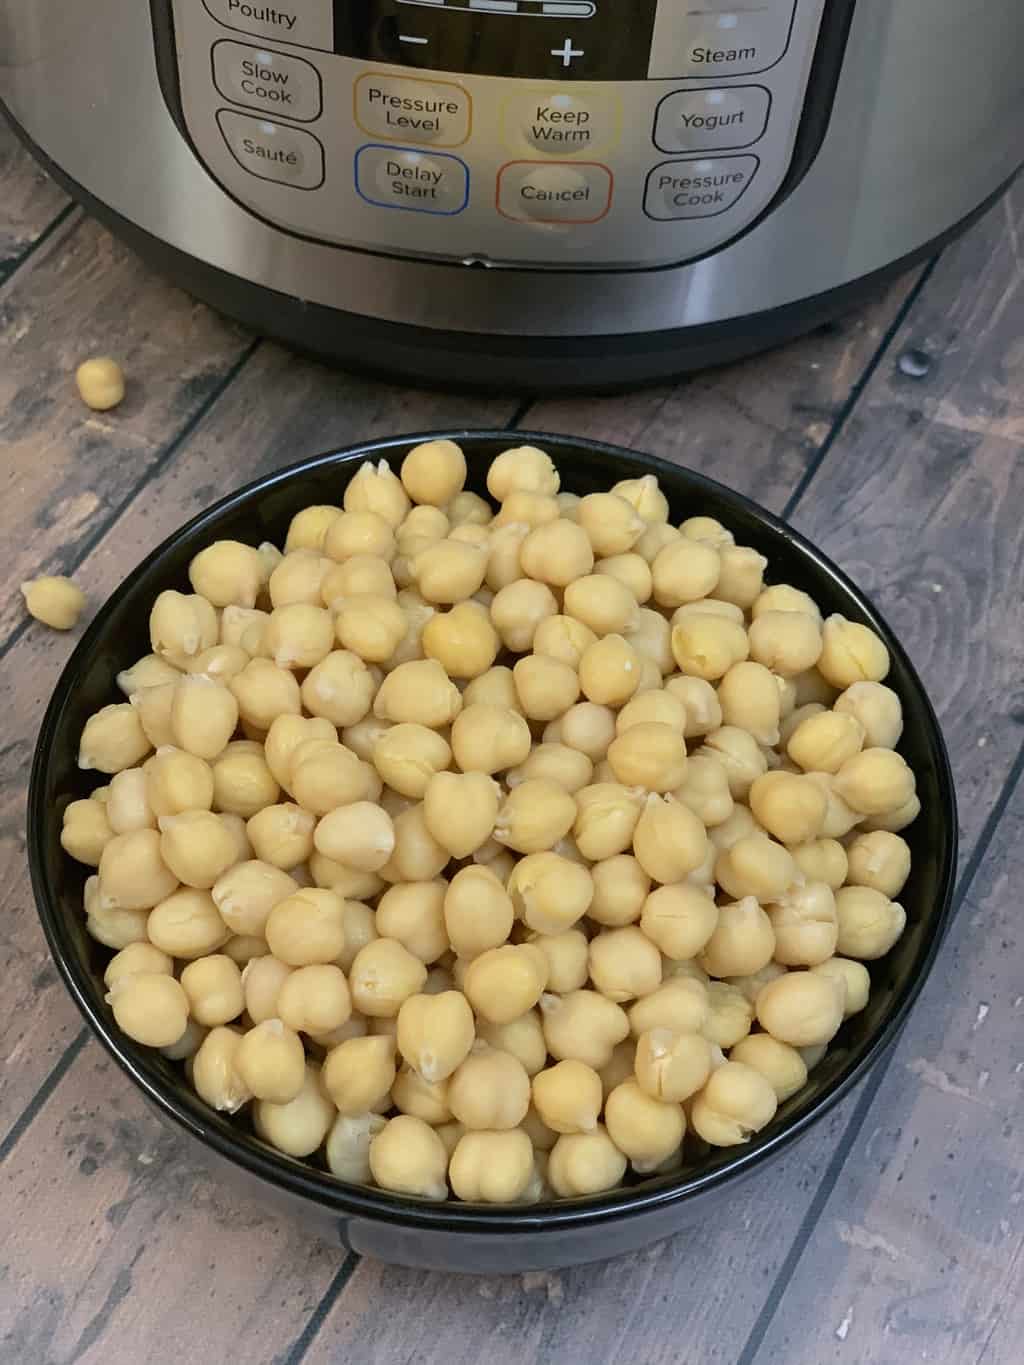 cooked chickpeas in a bowl and instant pot on the side